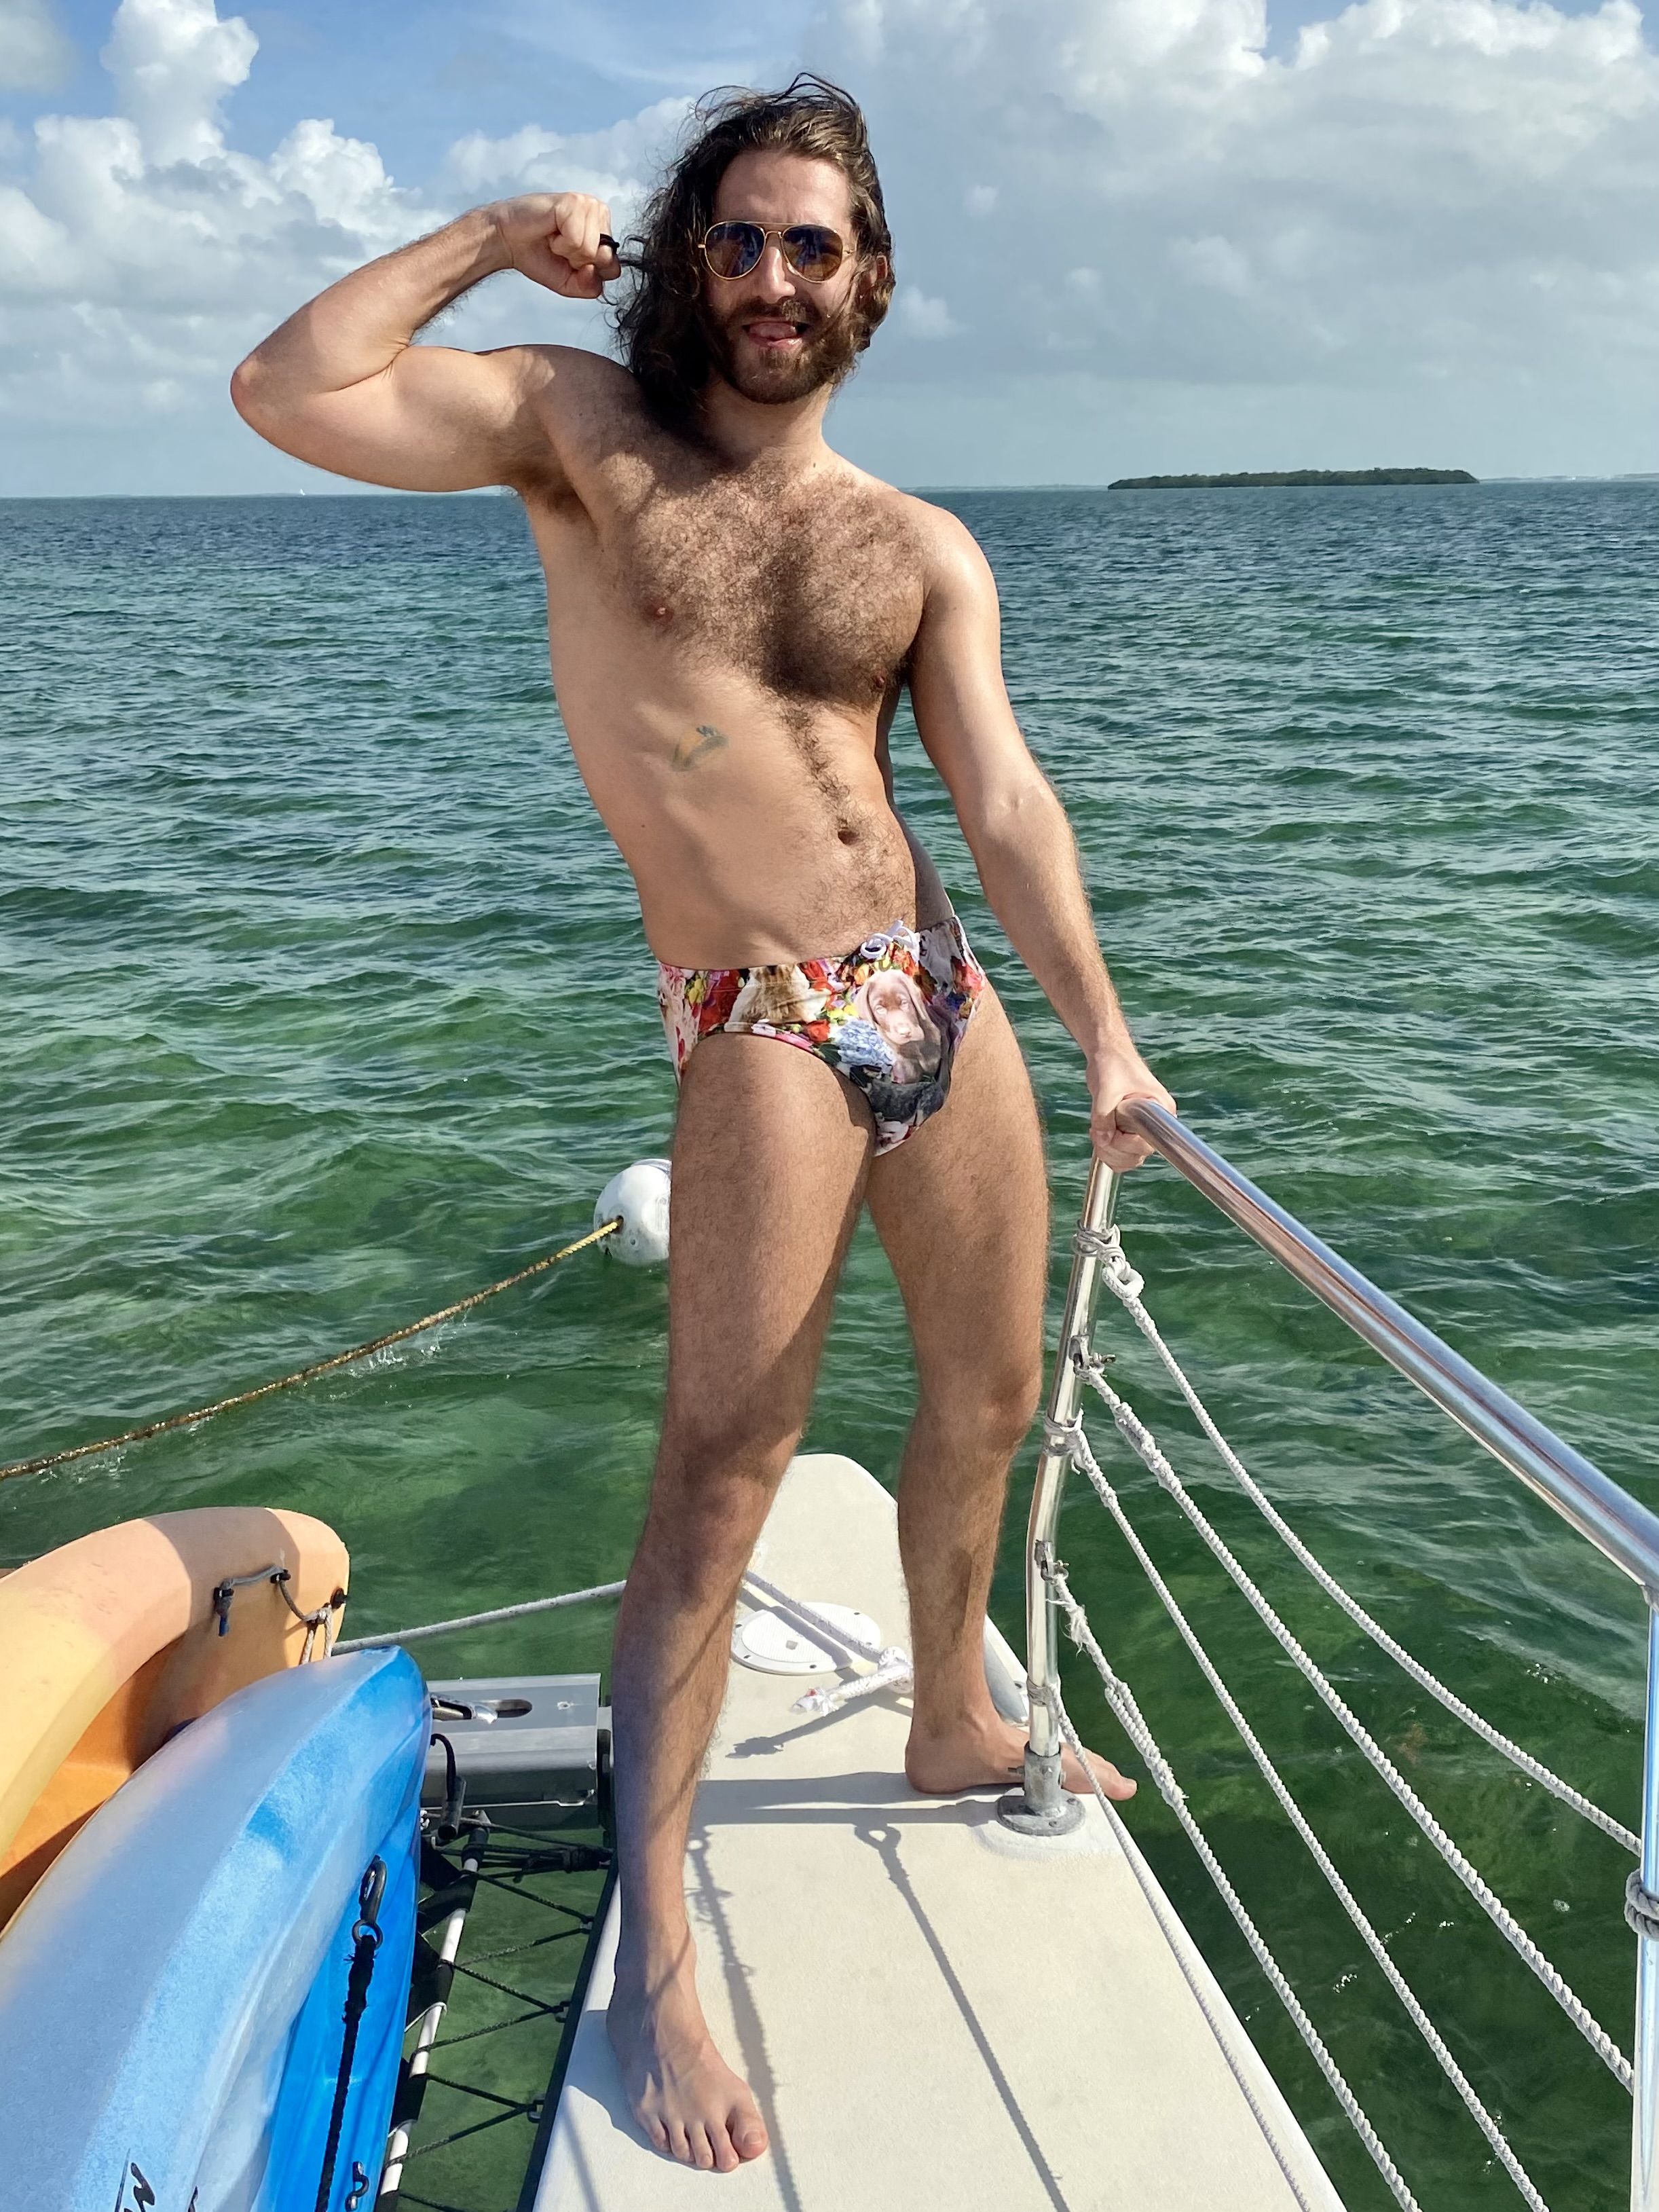 My Sexy Trip to Island House, the Nude Mens Resort in Key West